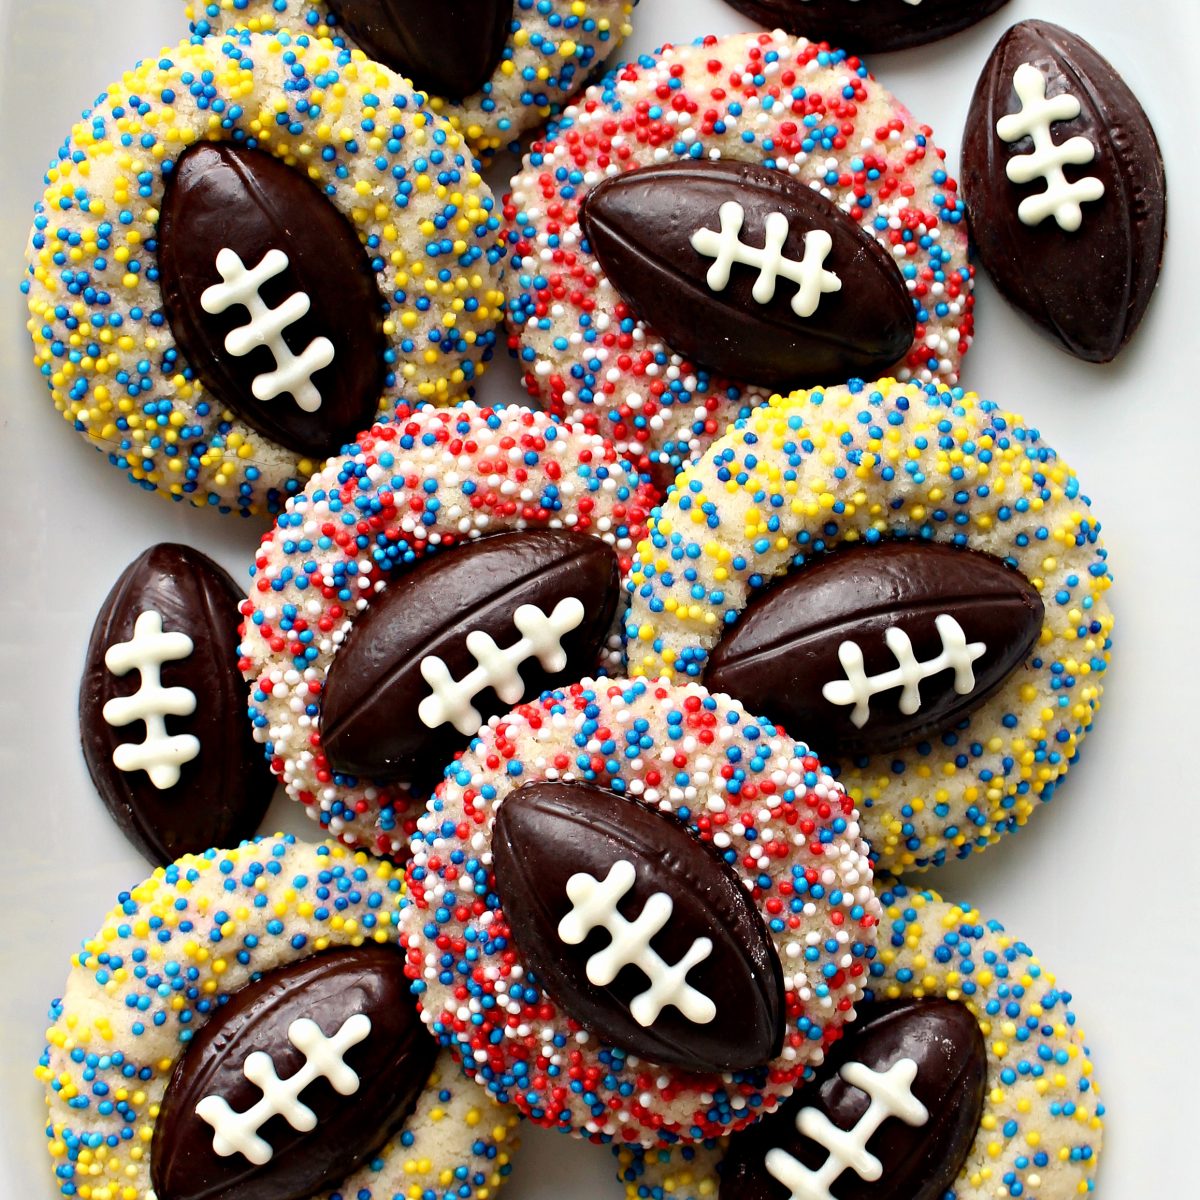 Shortbread Thumbprint Cookies with chocolate football centers and team colored sprinkles.